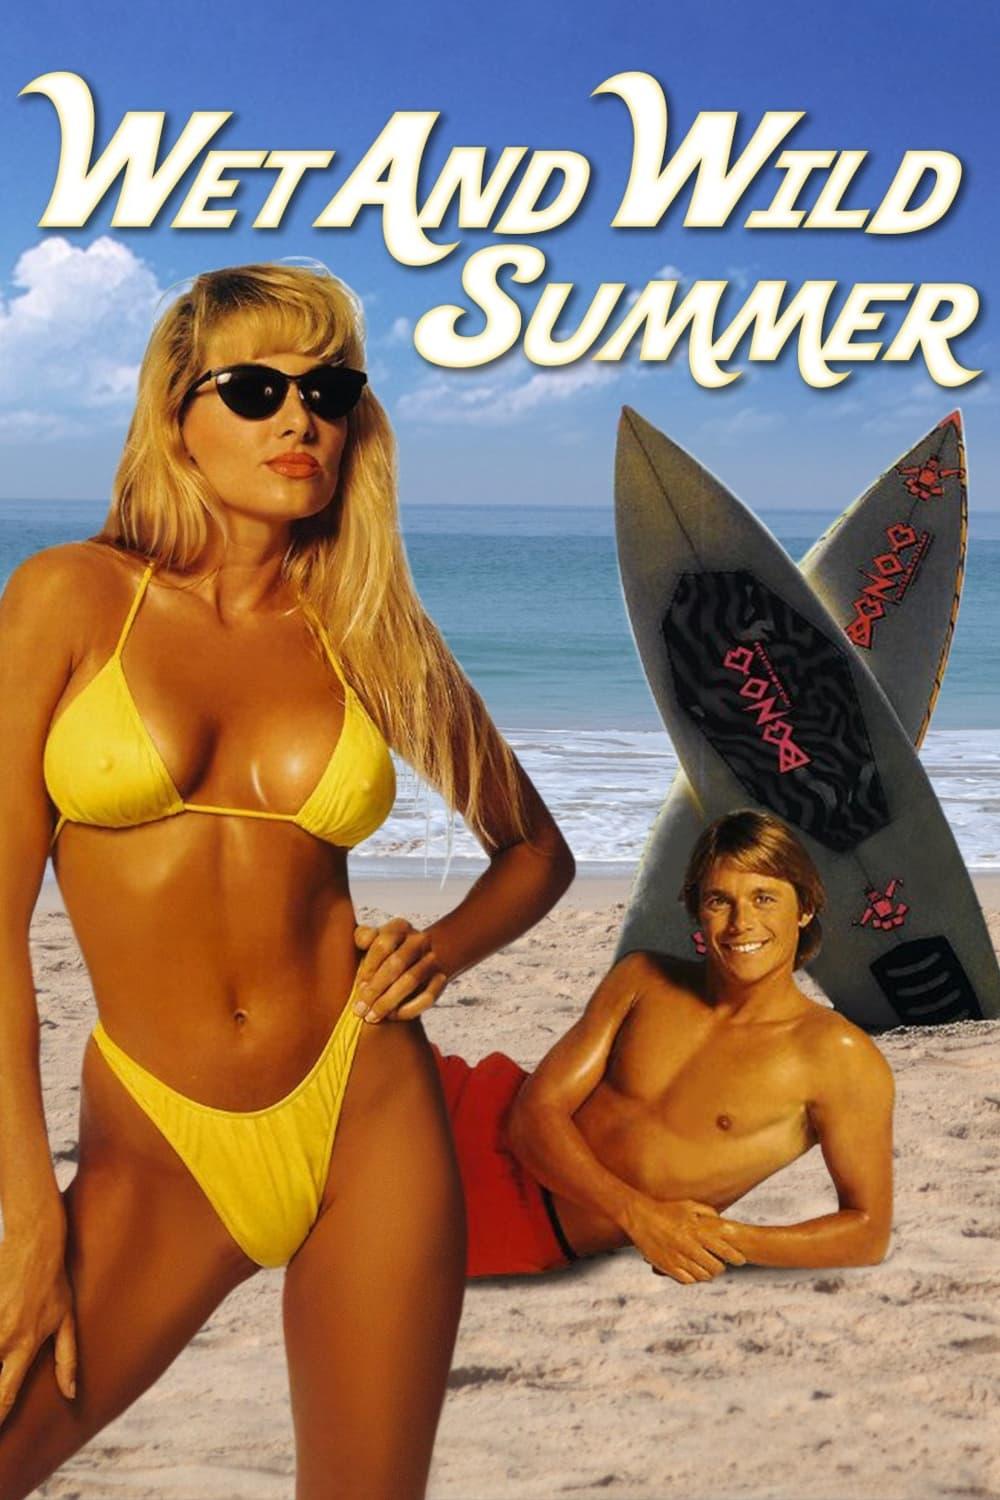 Wet and Wild Summer poster